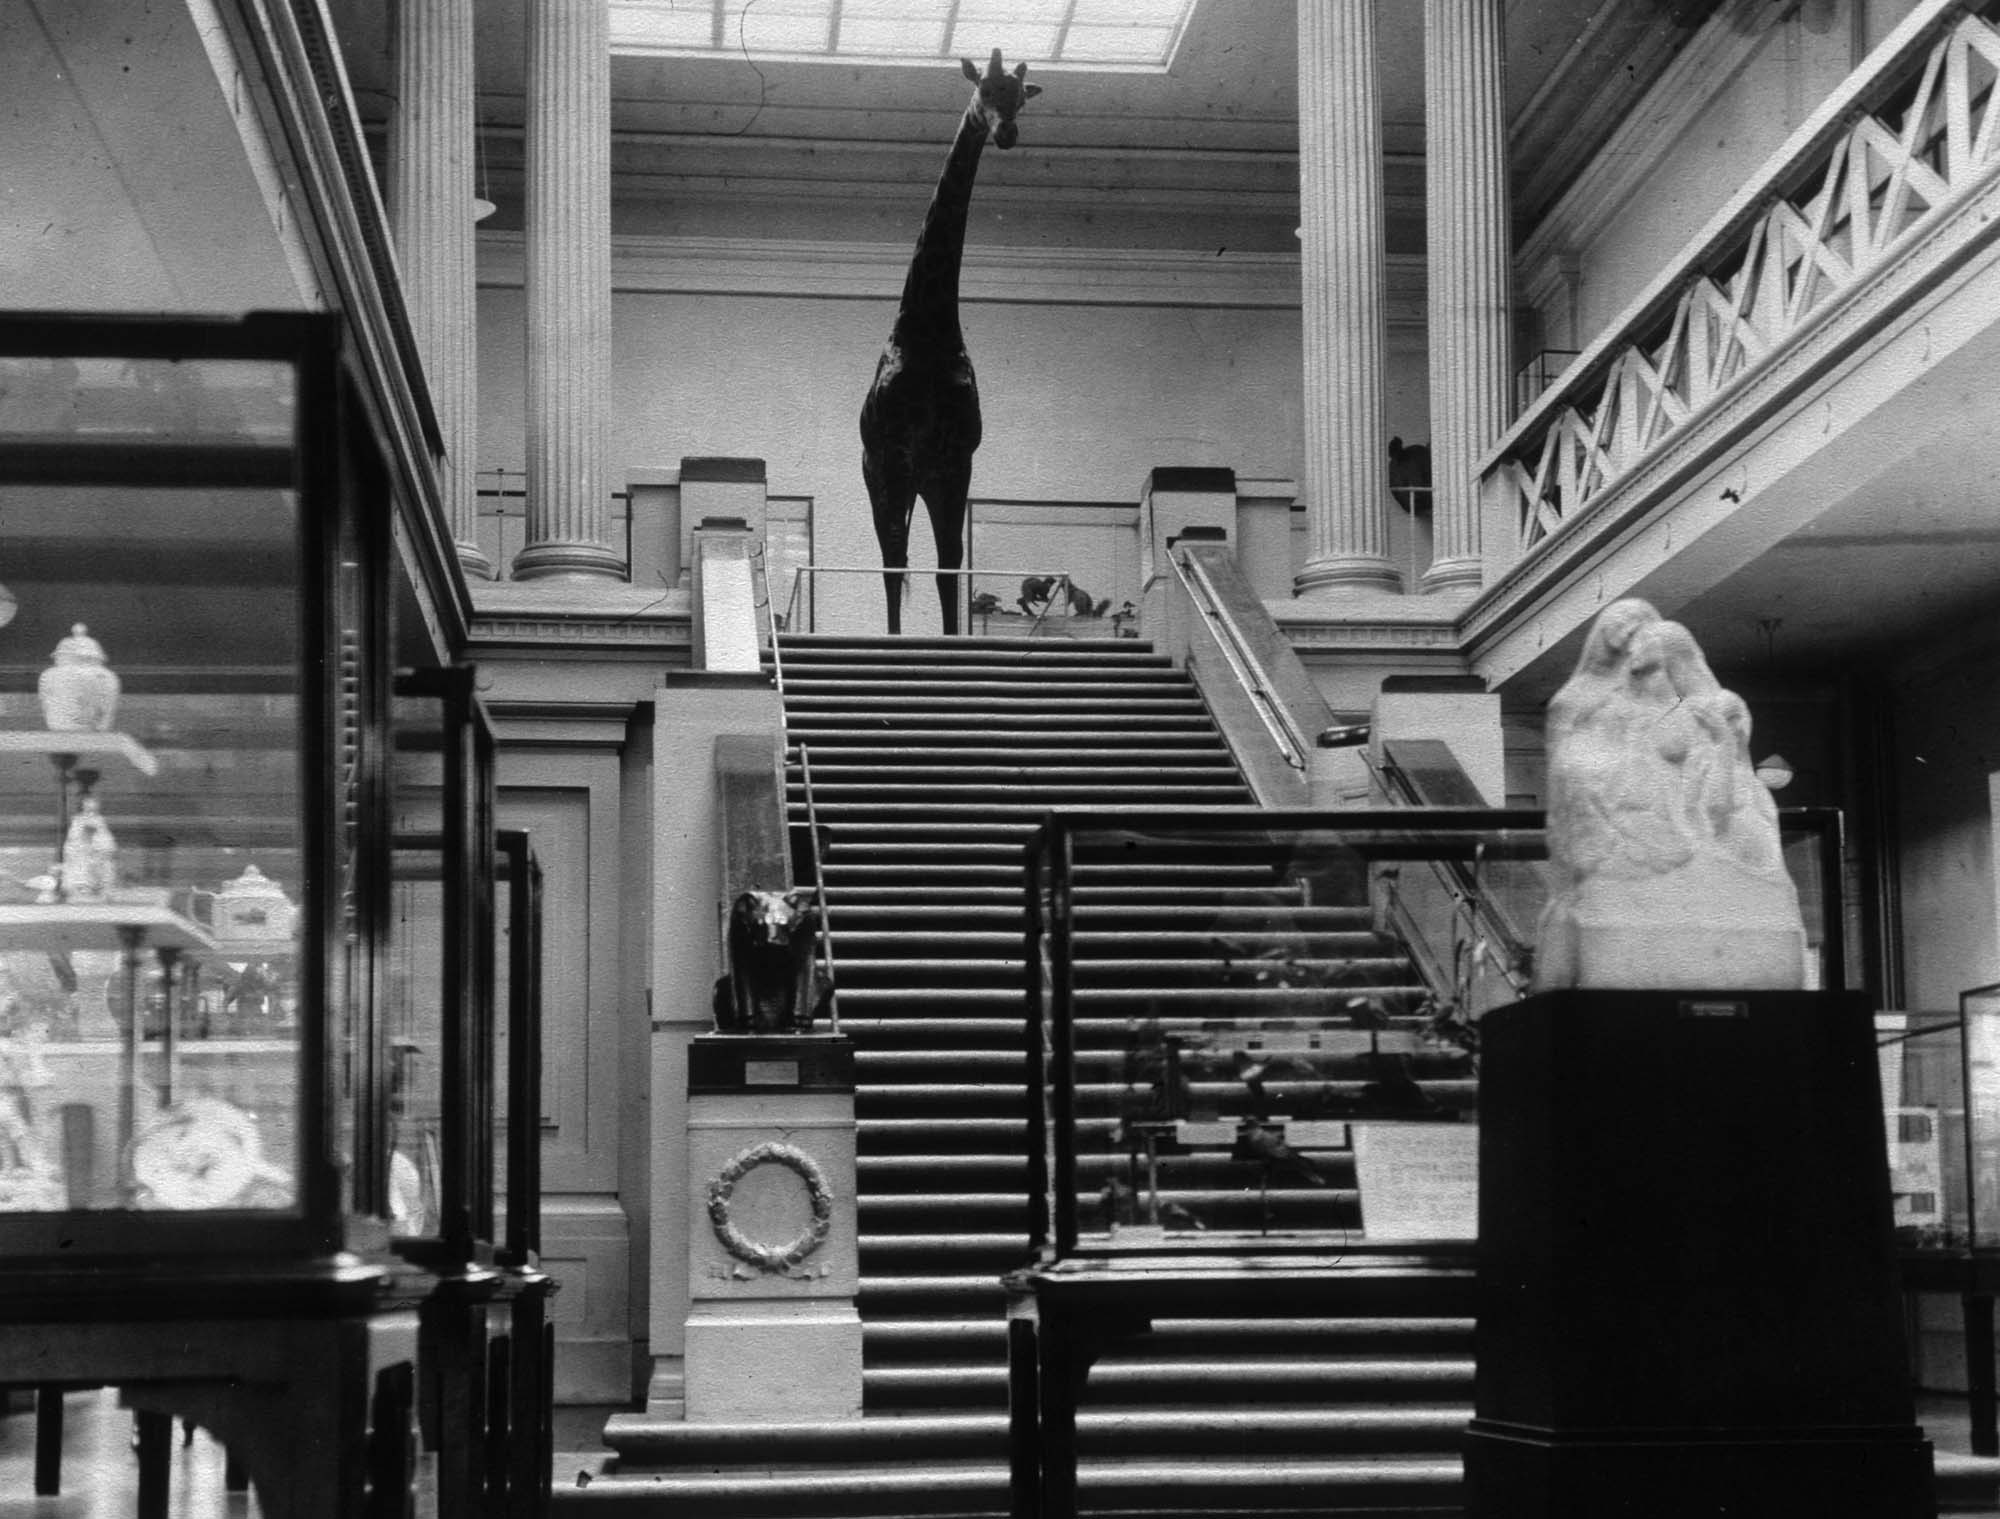 The main gallery with George the Giraffe, 1936 -